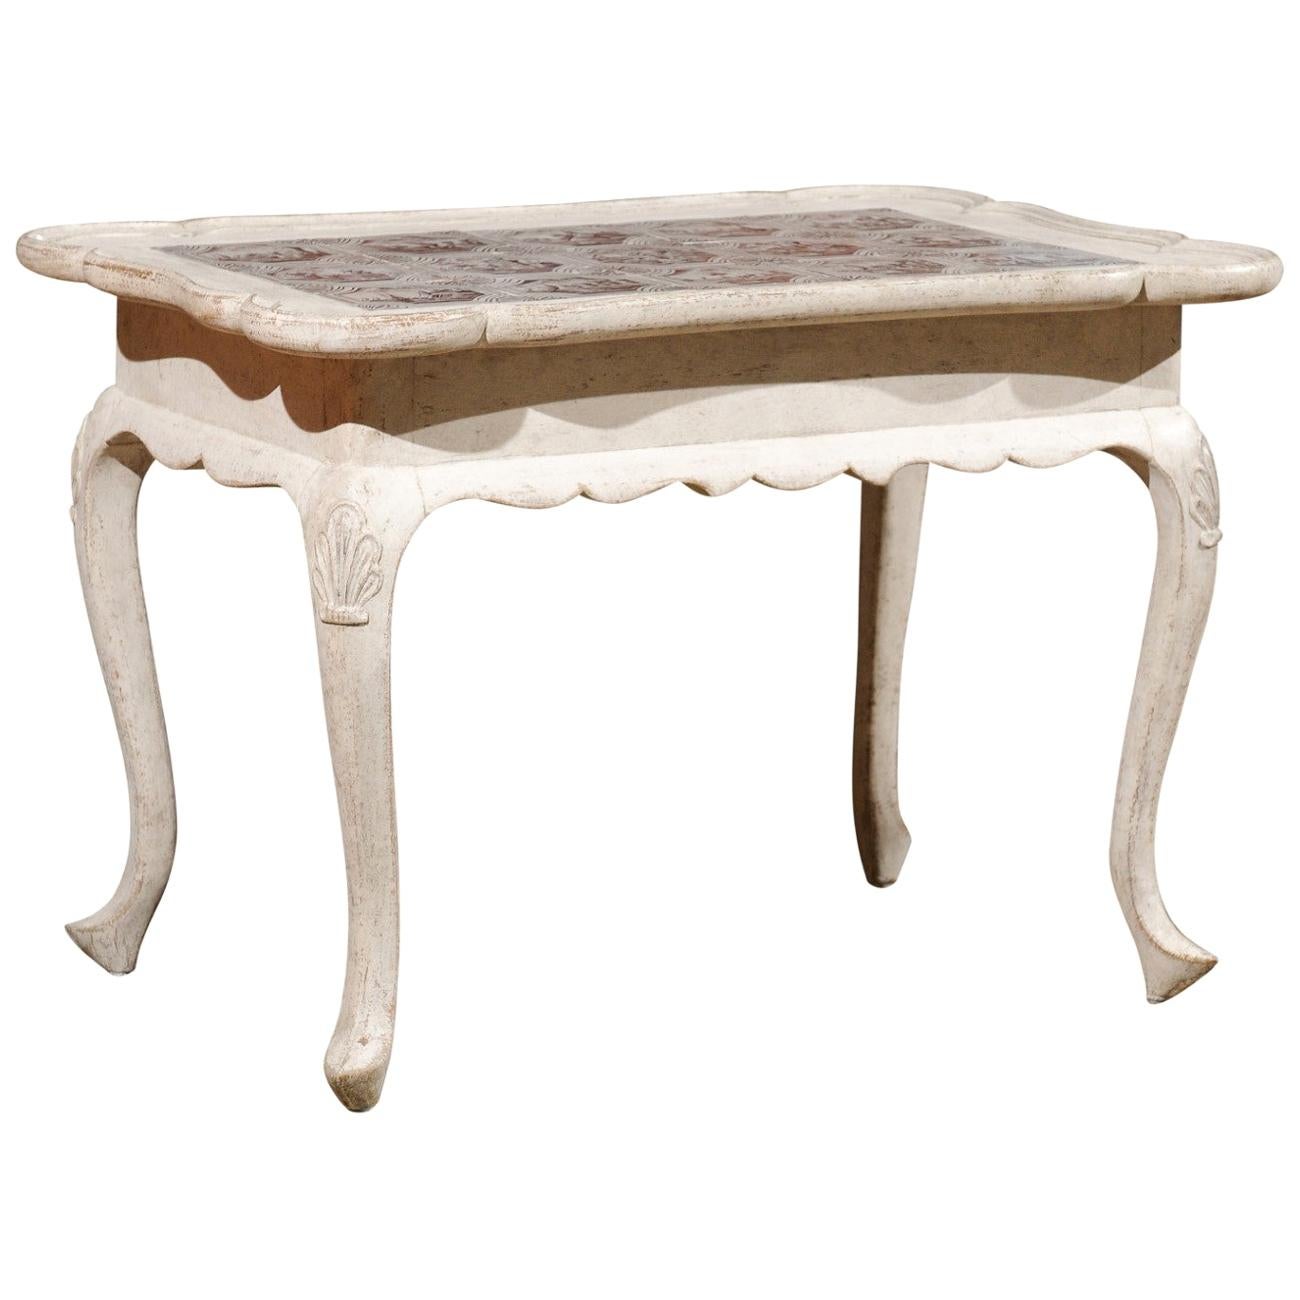 Danish Rococo Style Painted Table with Tiles, Cabriole Legs and Carved Apron